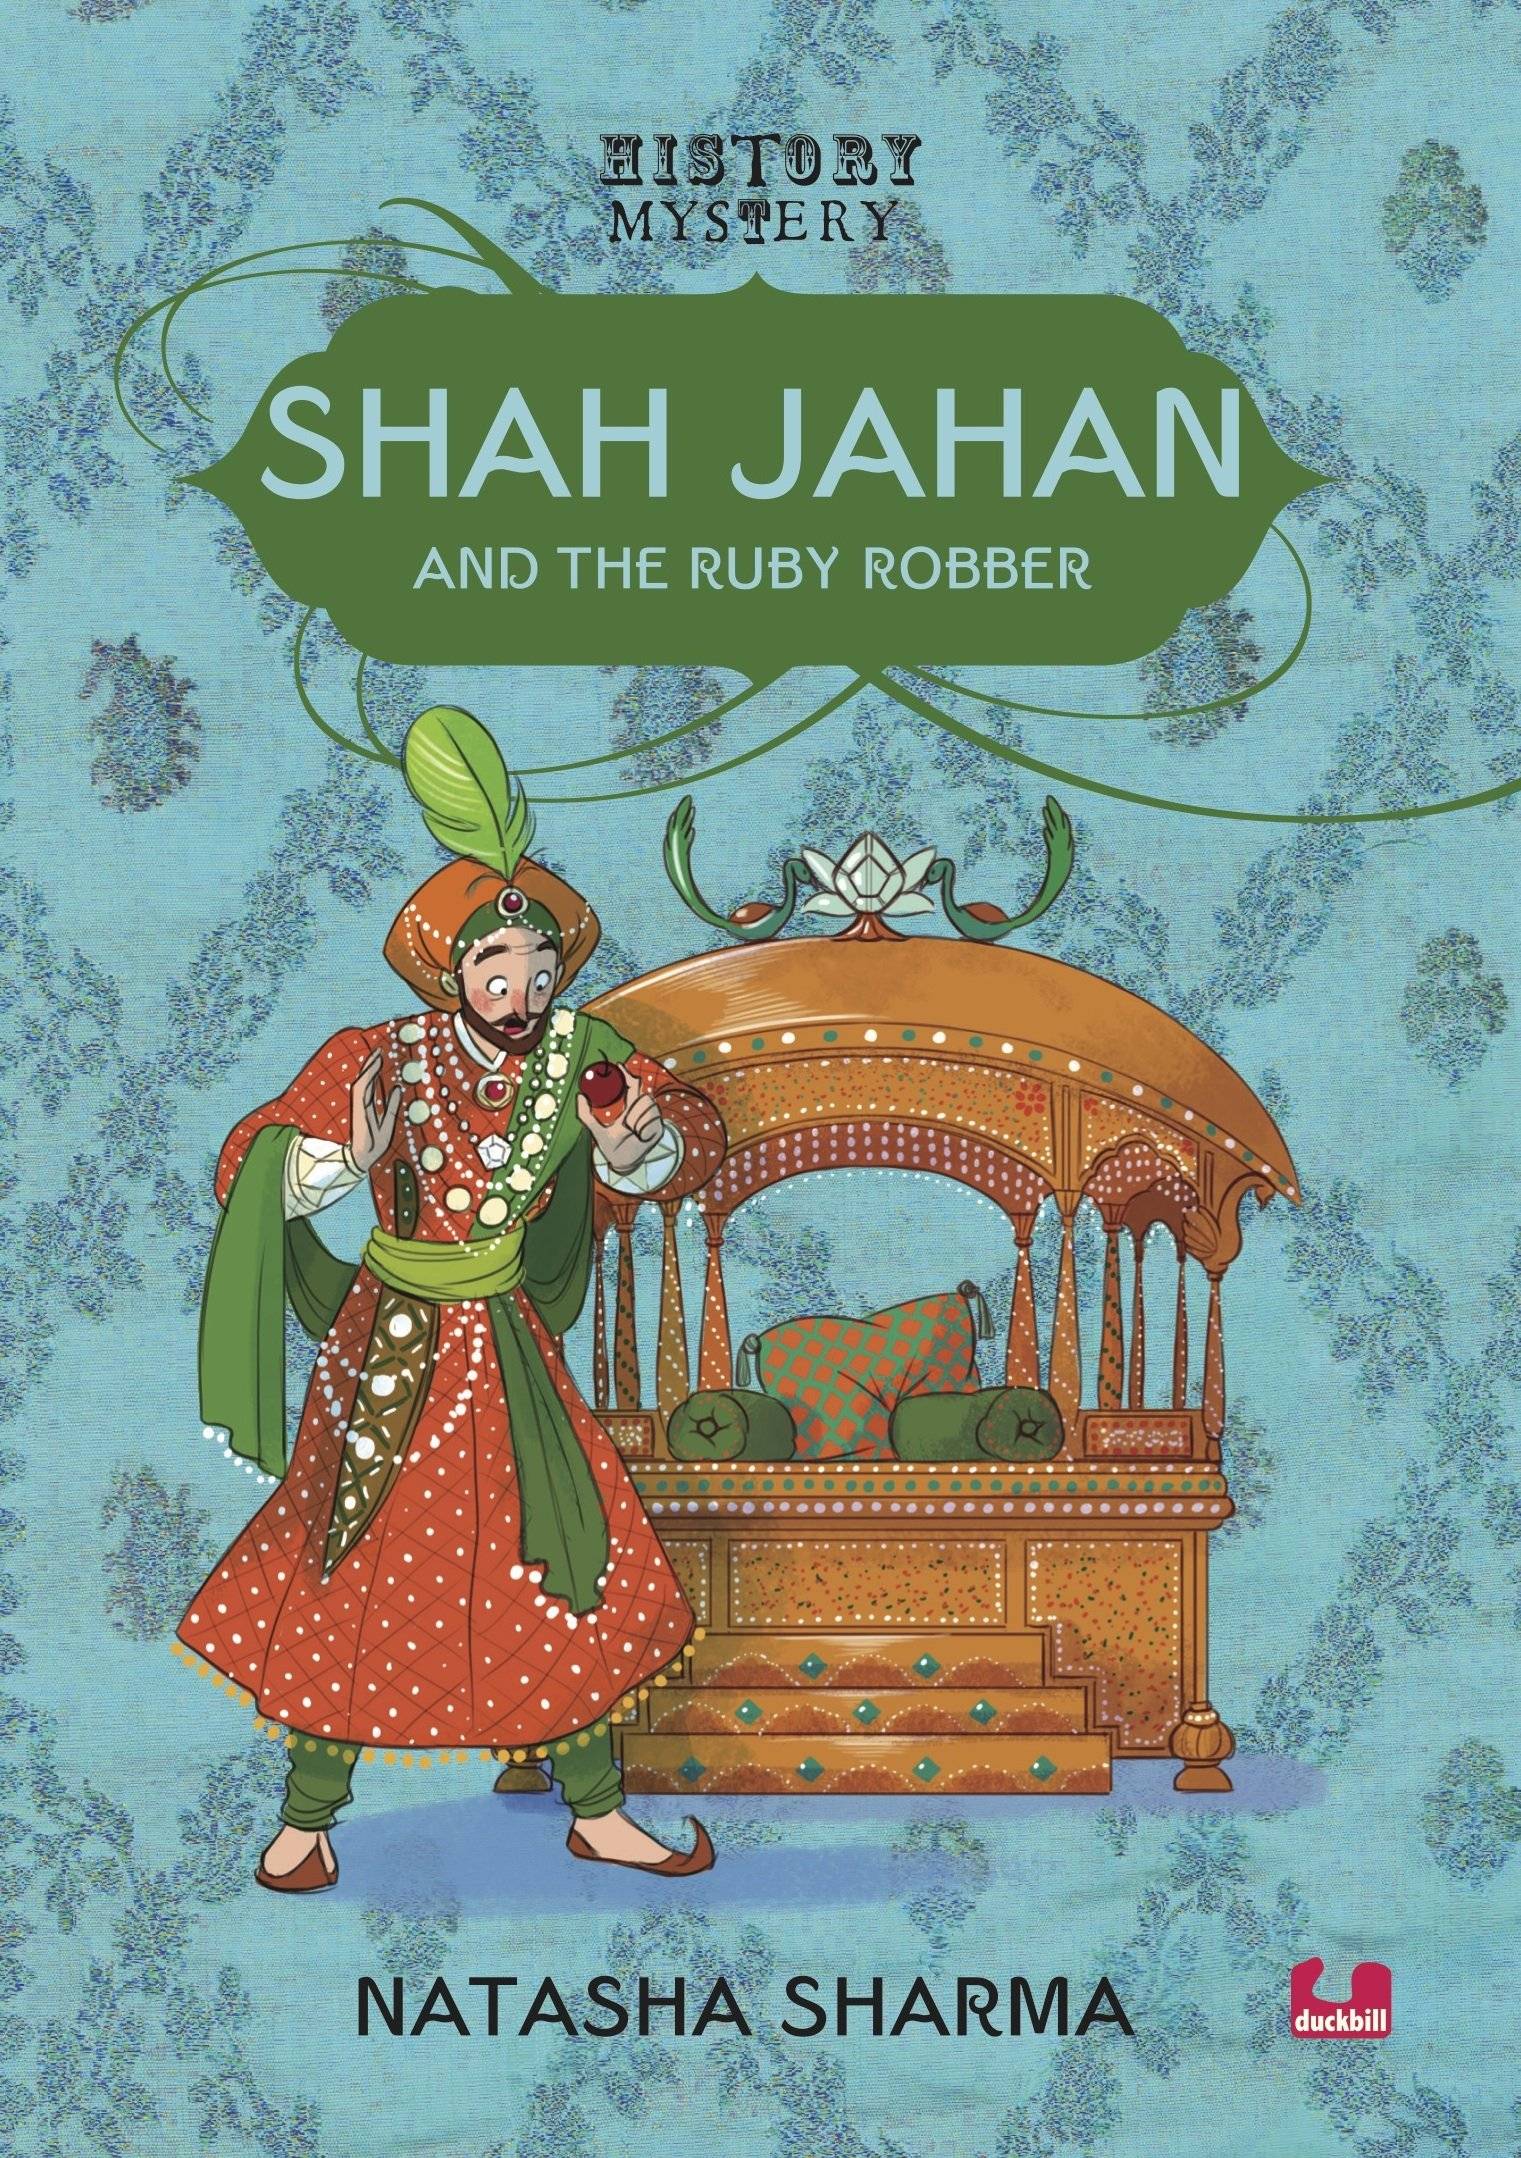 IMG : History Mystery Series- Shah Jahan and the Ruby Robber